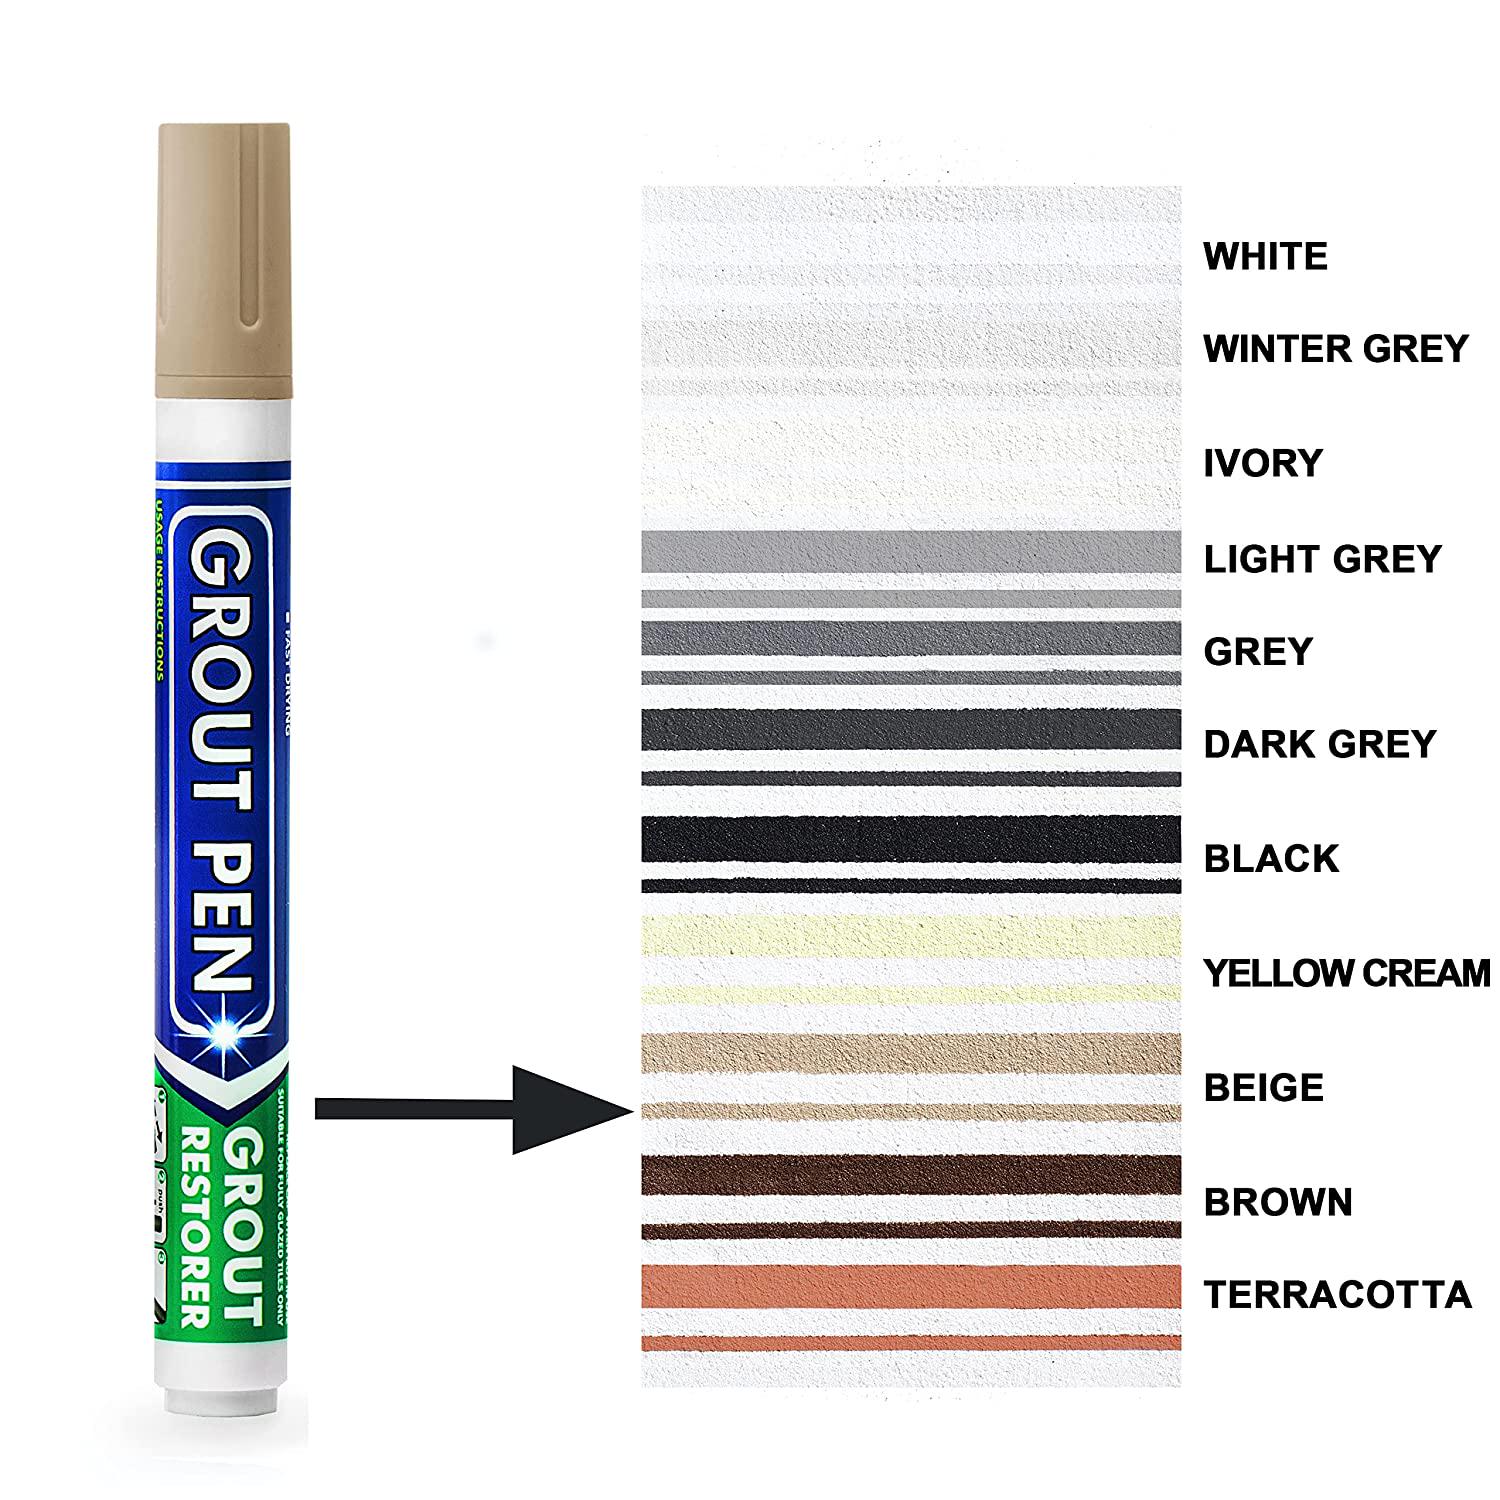 Grout Pen, Grout Pen Beige - Ideal to Restore the Look of Tile Grout Lines